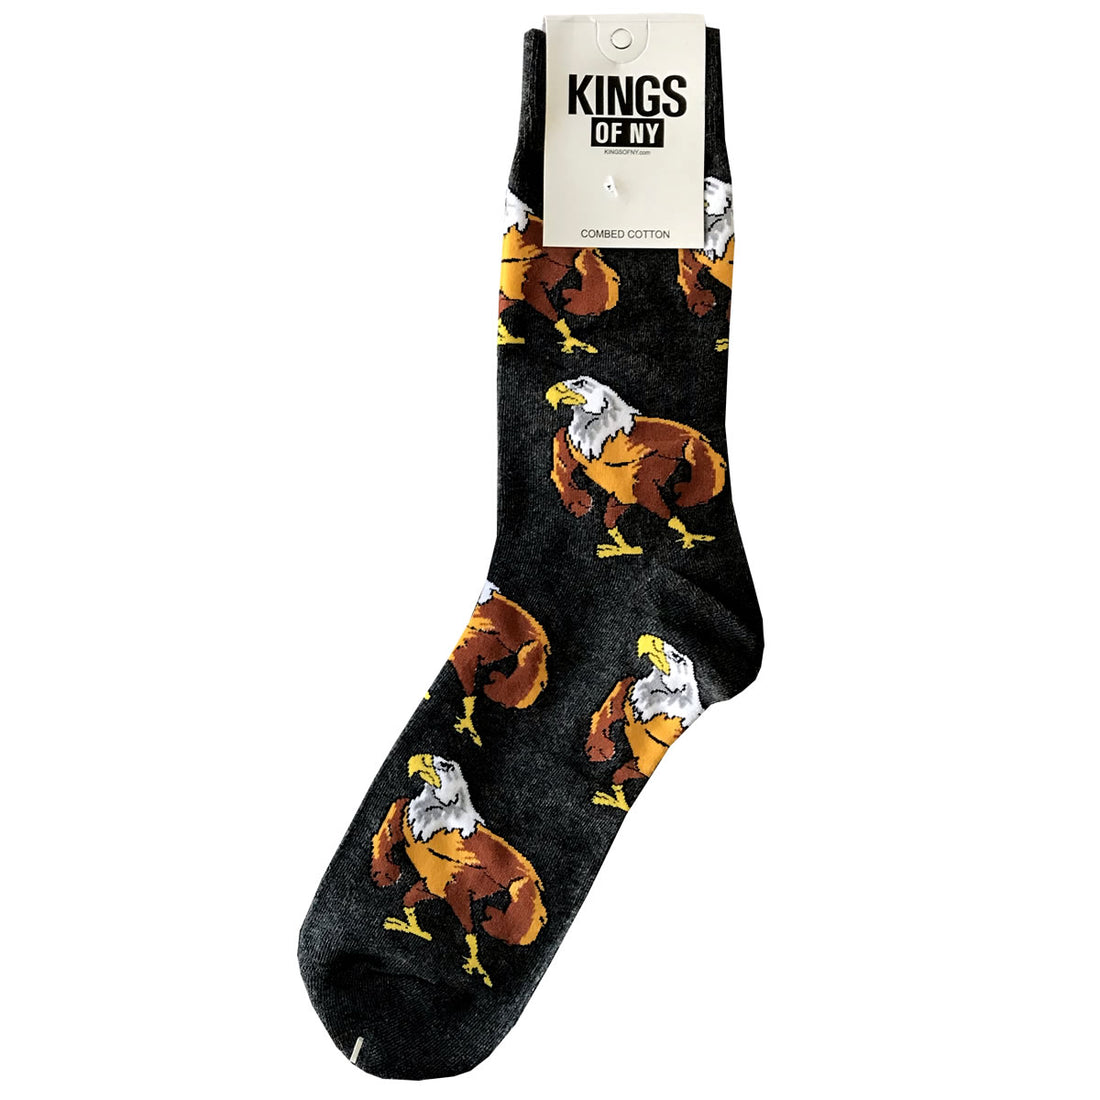 Strong Eagle America Black Mens Cotton Socks by KINGS OF NY